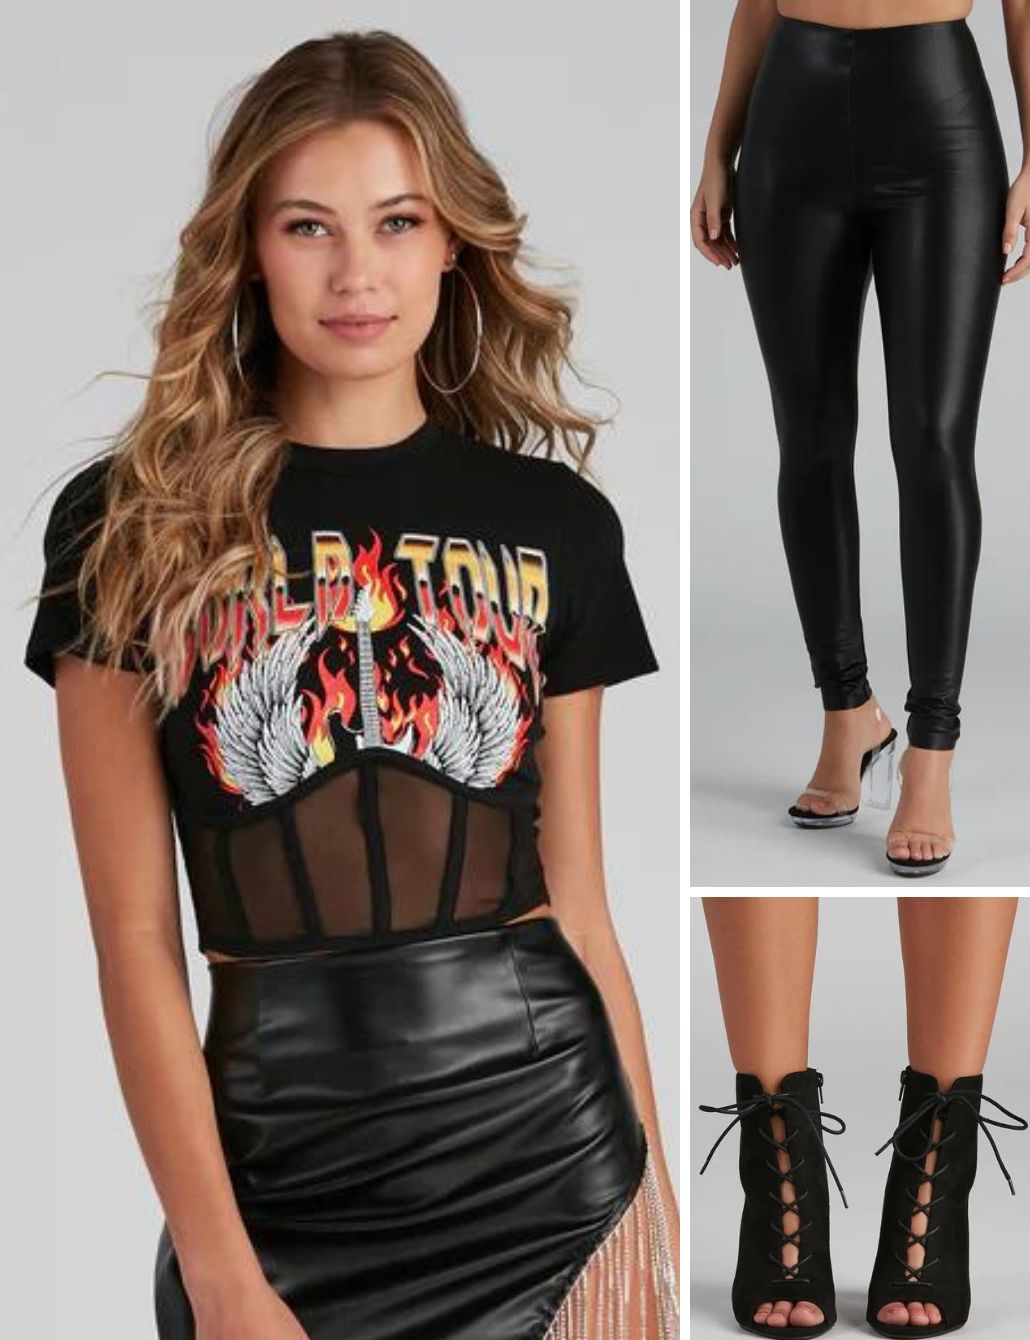 Black Bustier Top with Leather Pants Outfits (4 ideas & outfits)